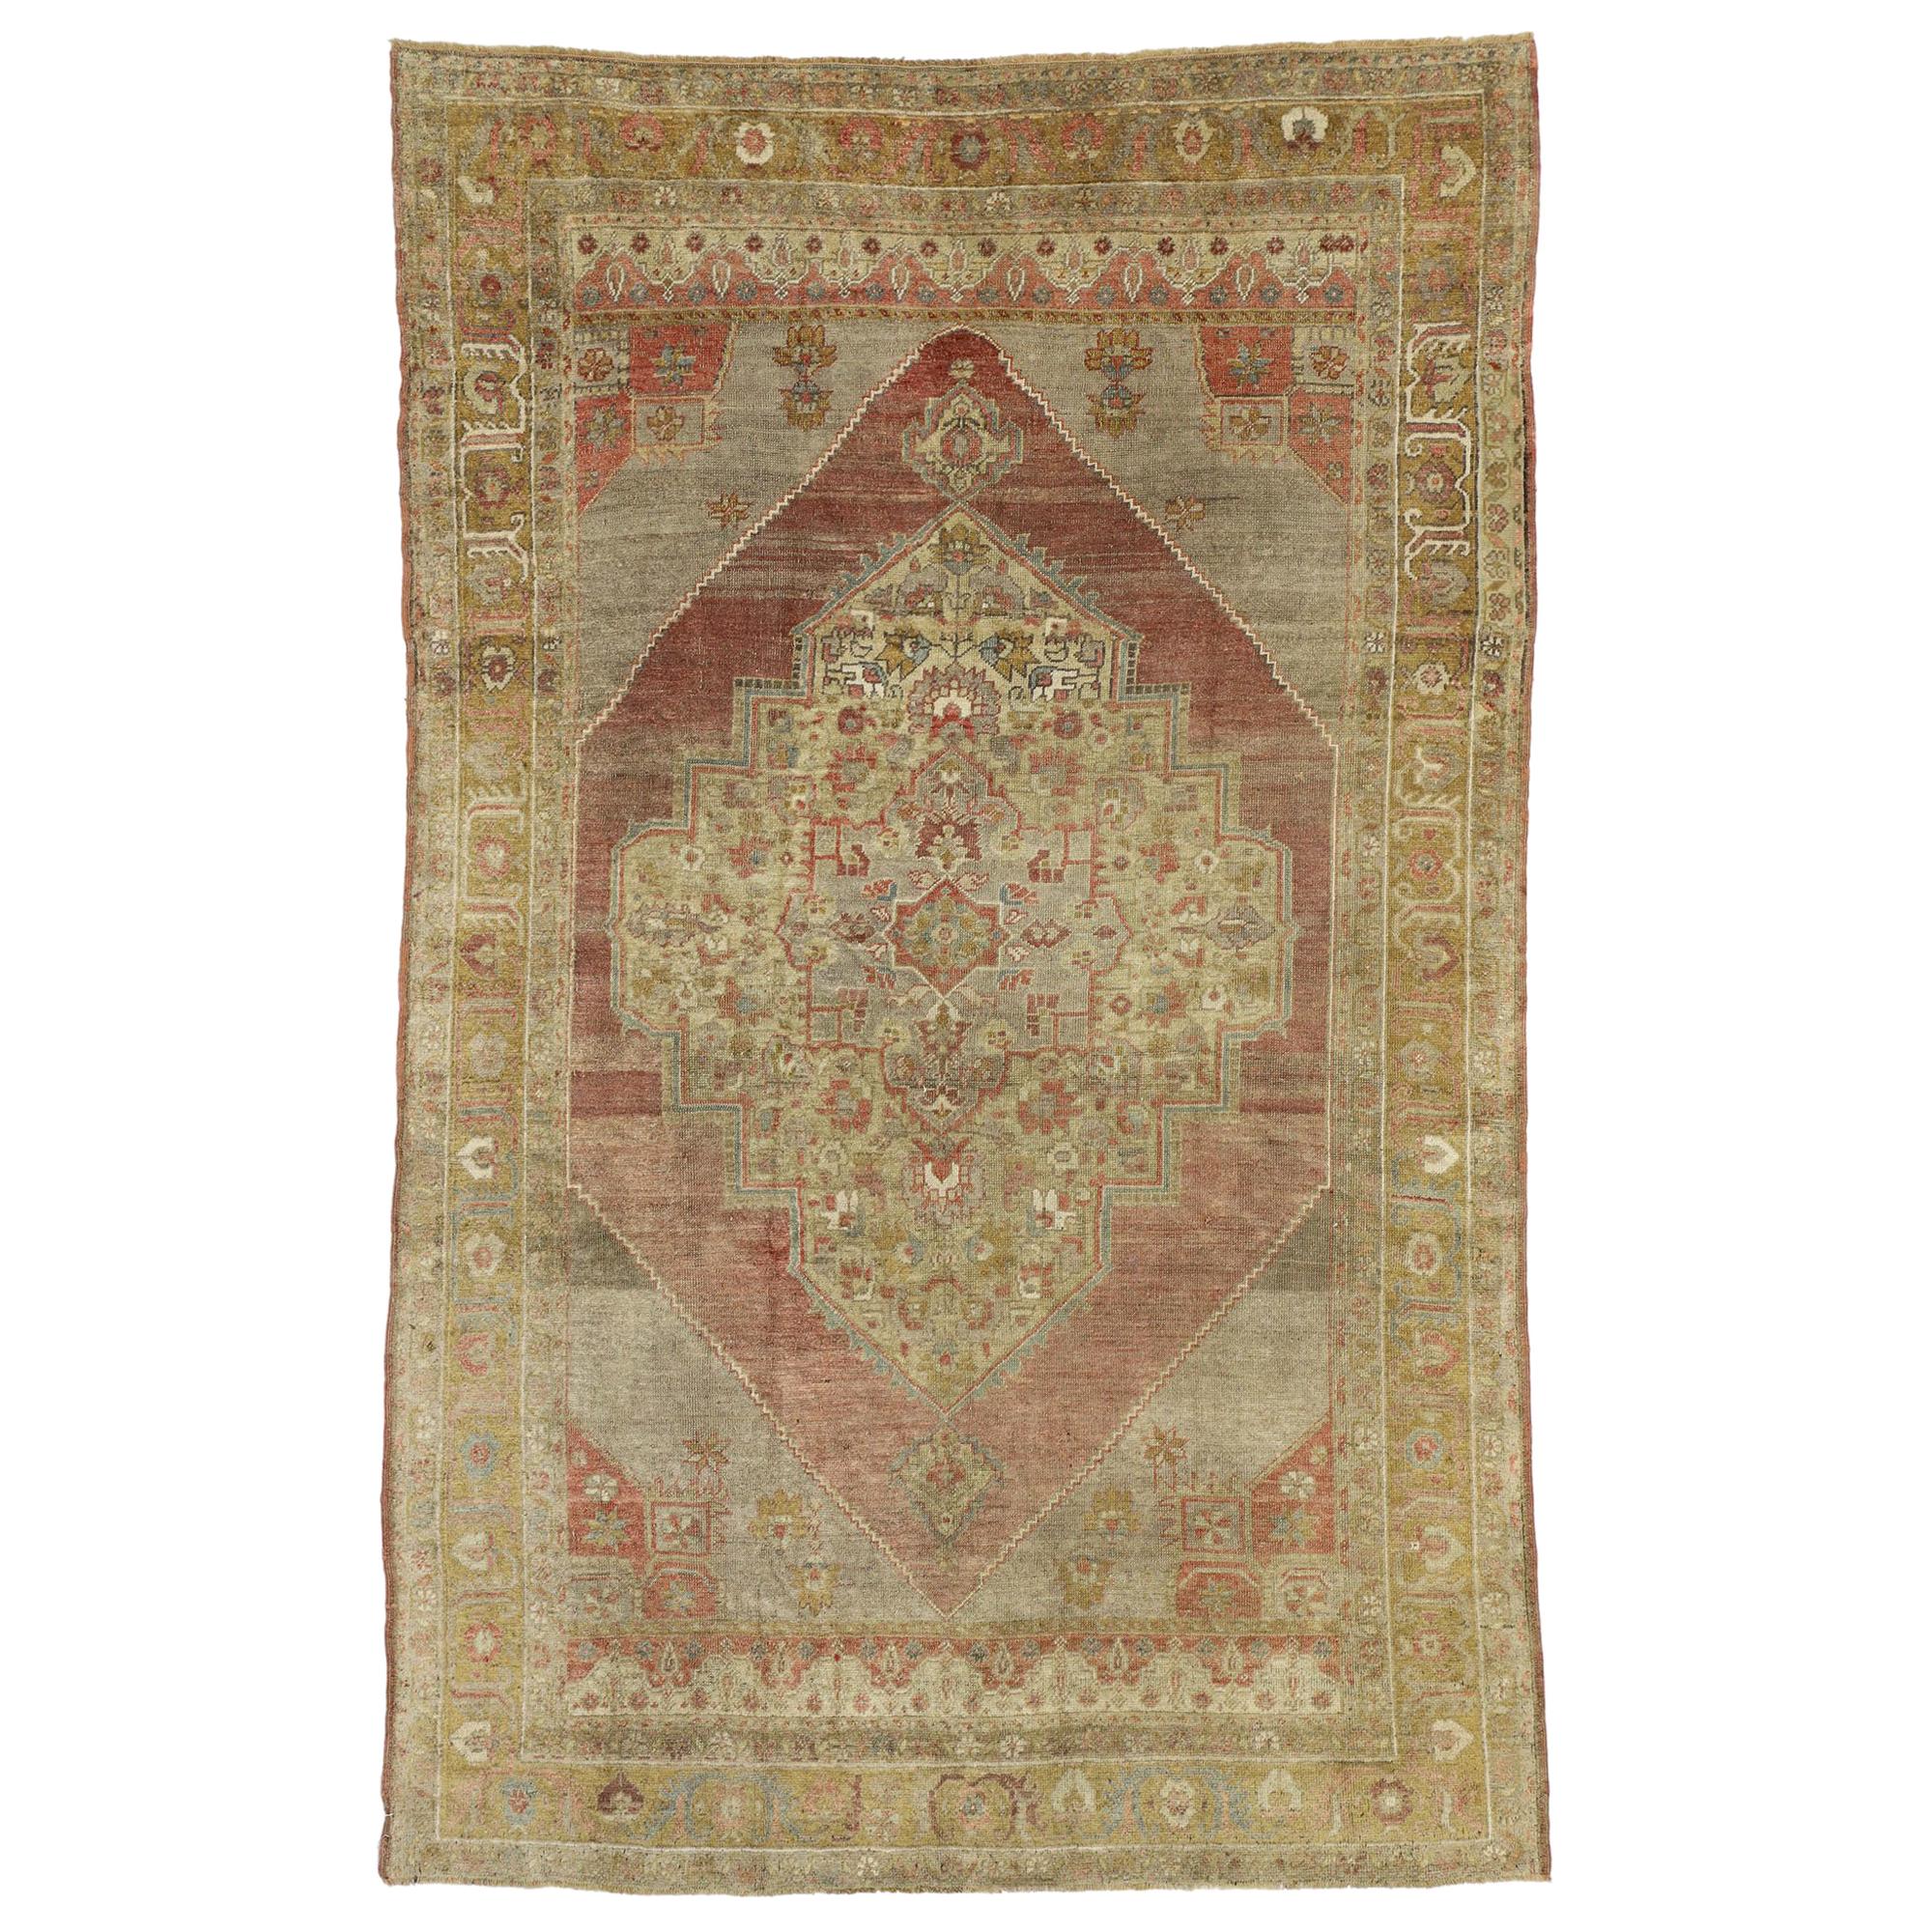 Distressed Vintage Turkish Oushak Rug with Rustic Jacobean Style